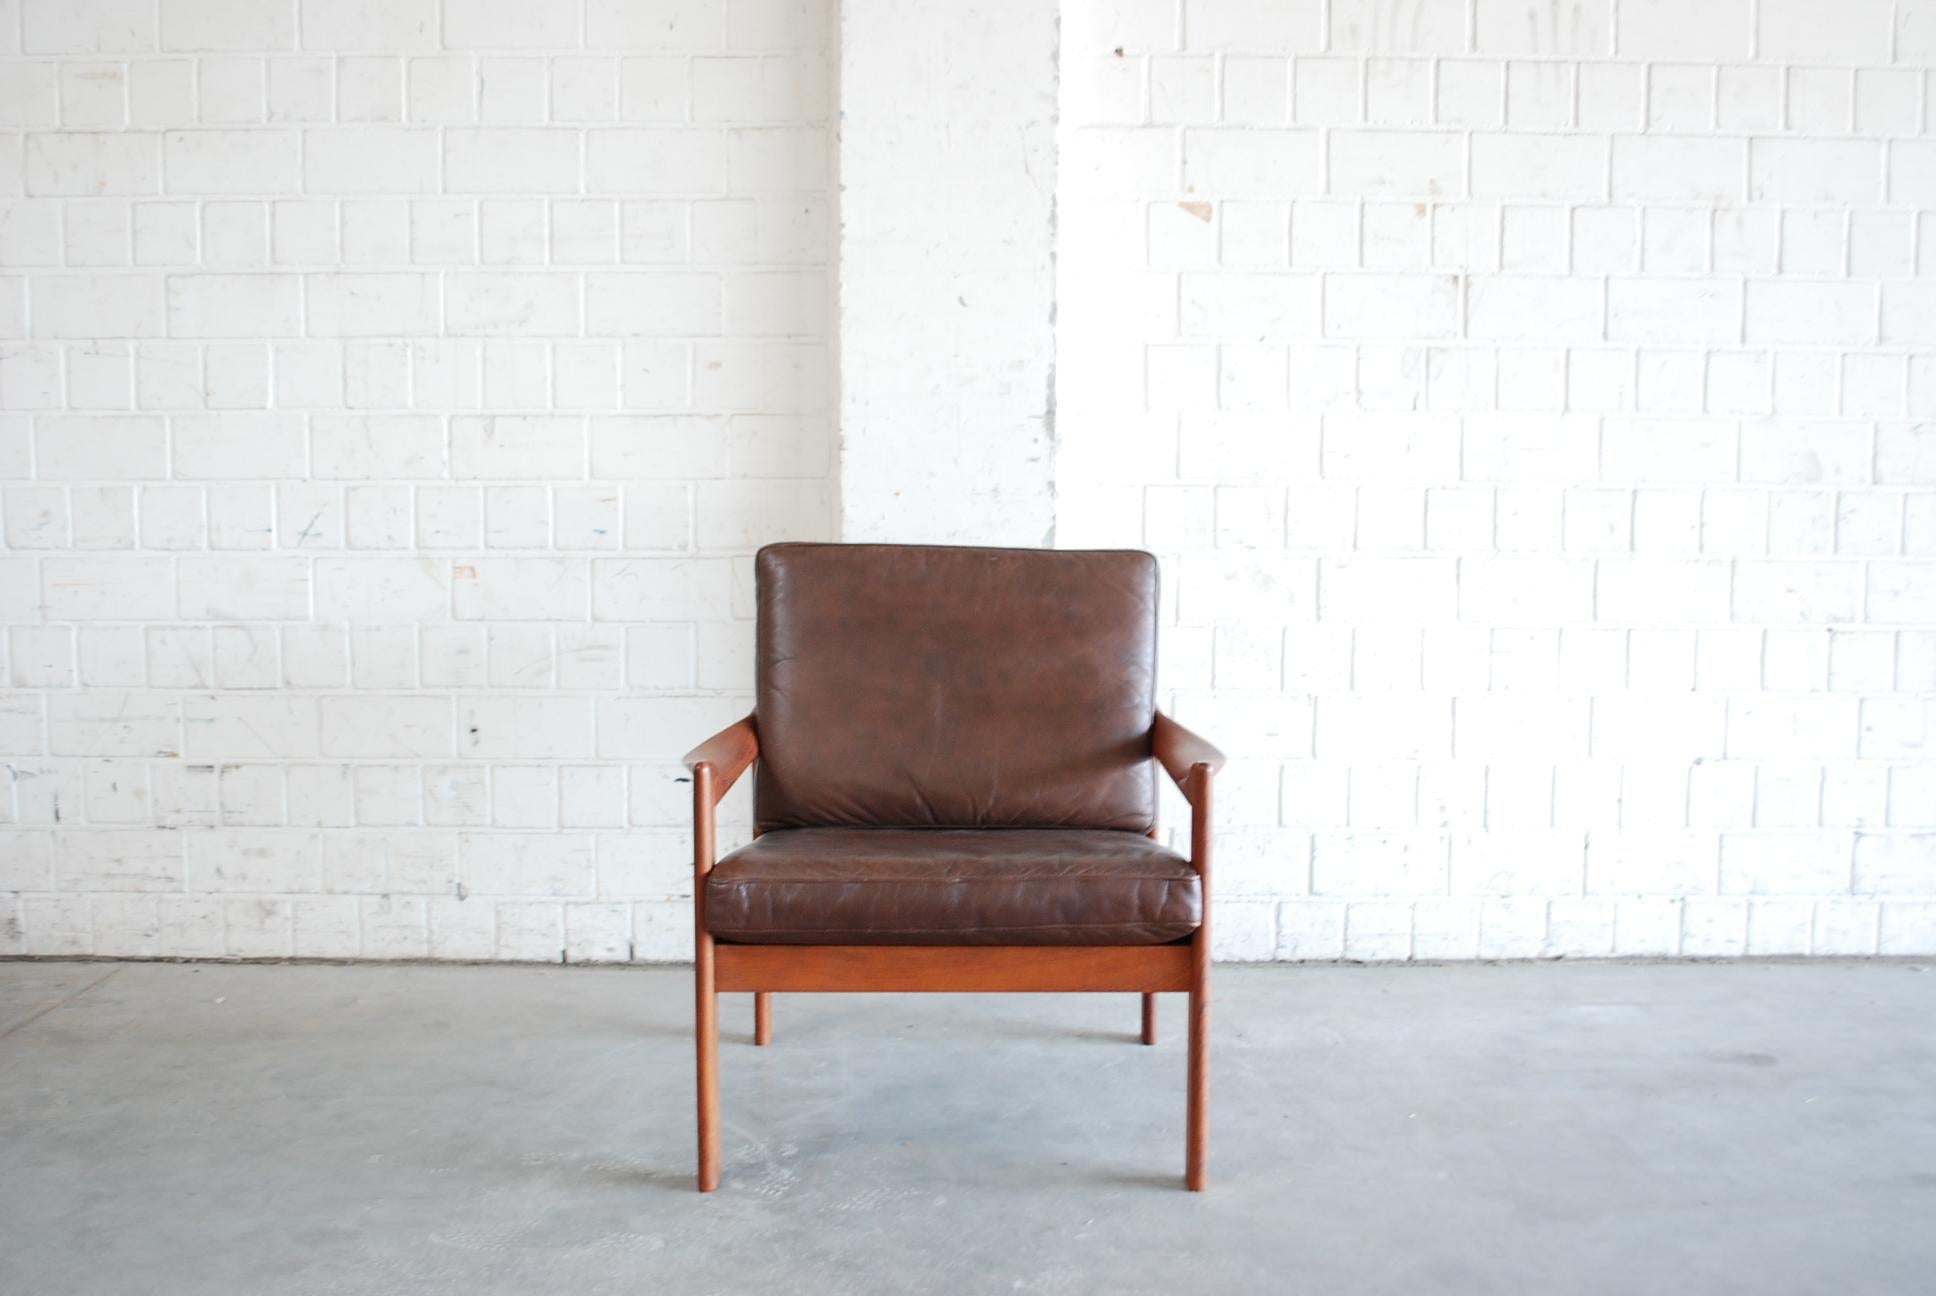 Danish modern teak chair with brown aniline leather.
Design by Illum Wikkelsø and manufactured by Niels Eilersen.
Great comfort with the organic curved armrests.